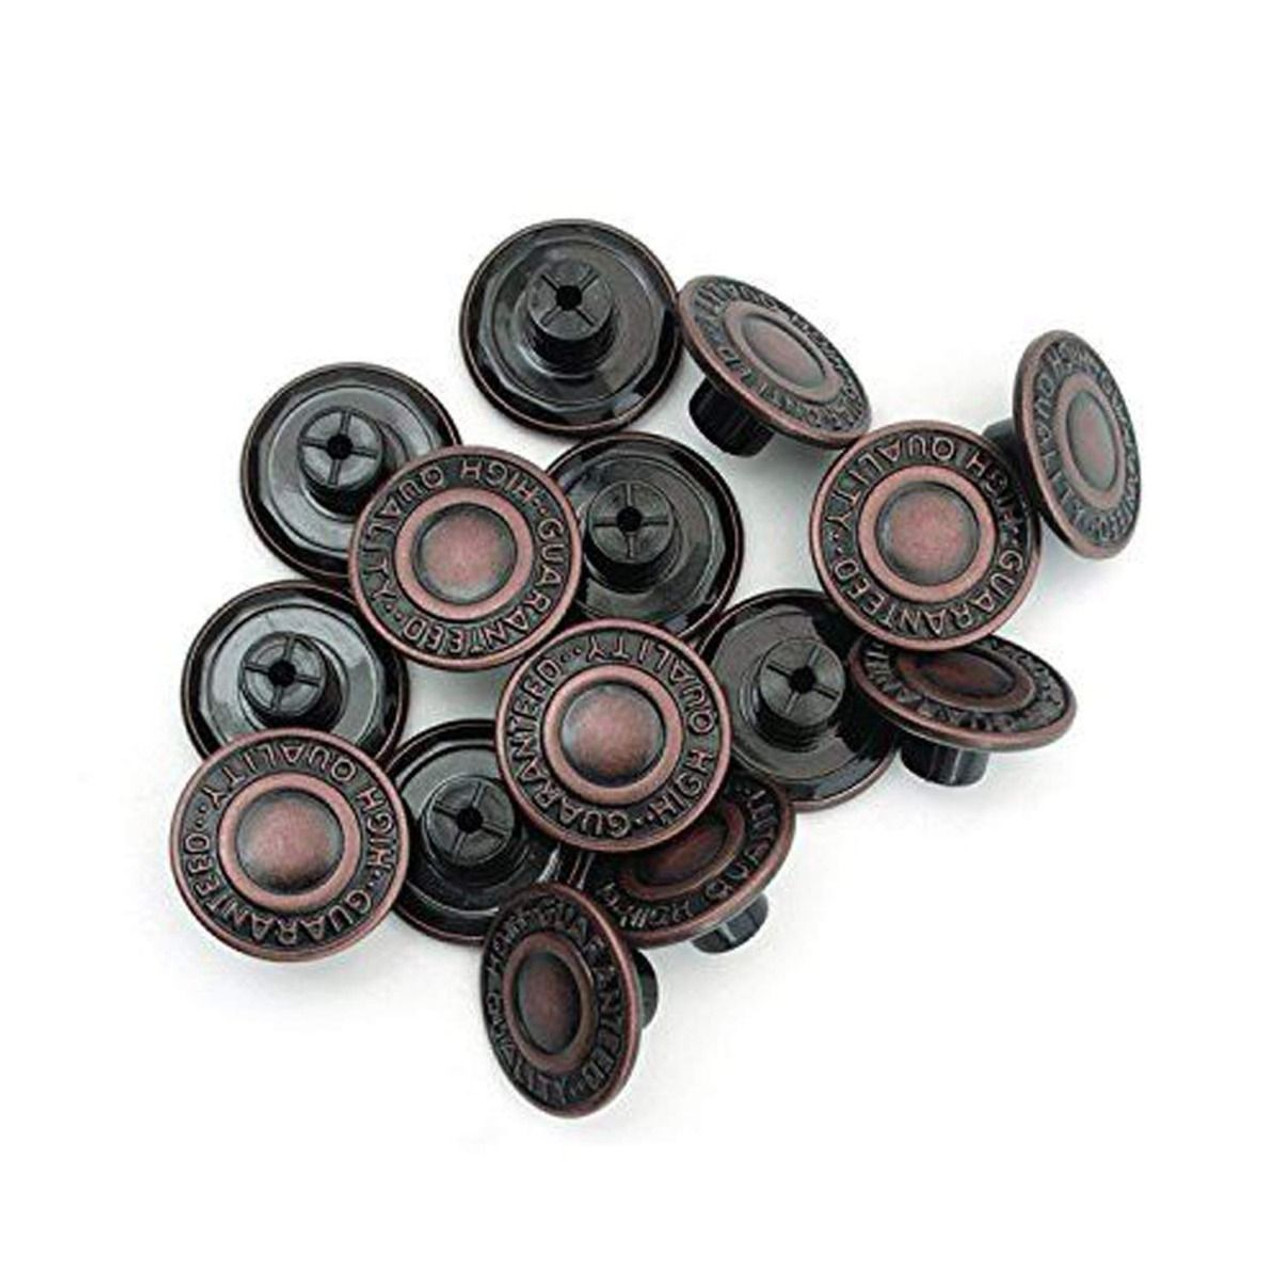 17mm Dark Bronze "High Quality Guaranteed" Jeans Buttons with Pins